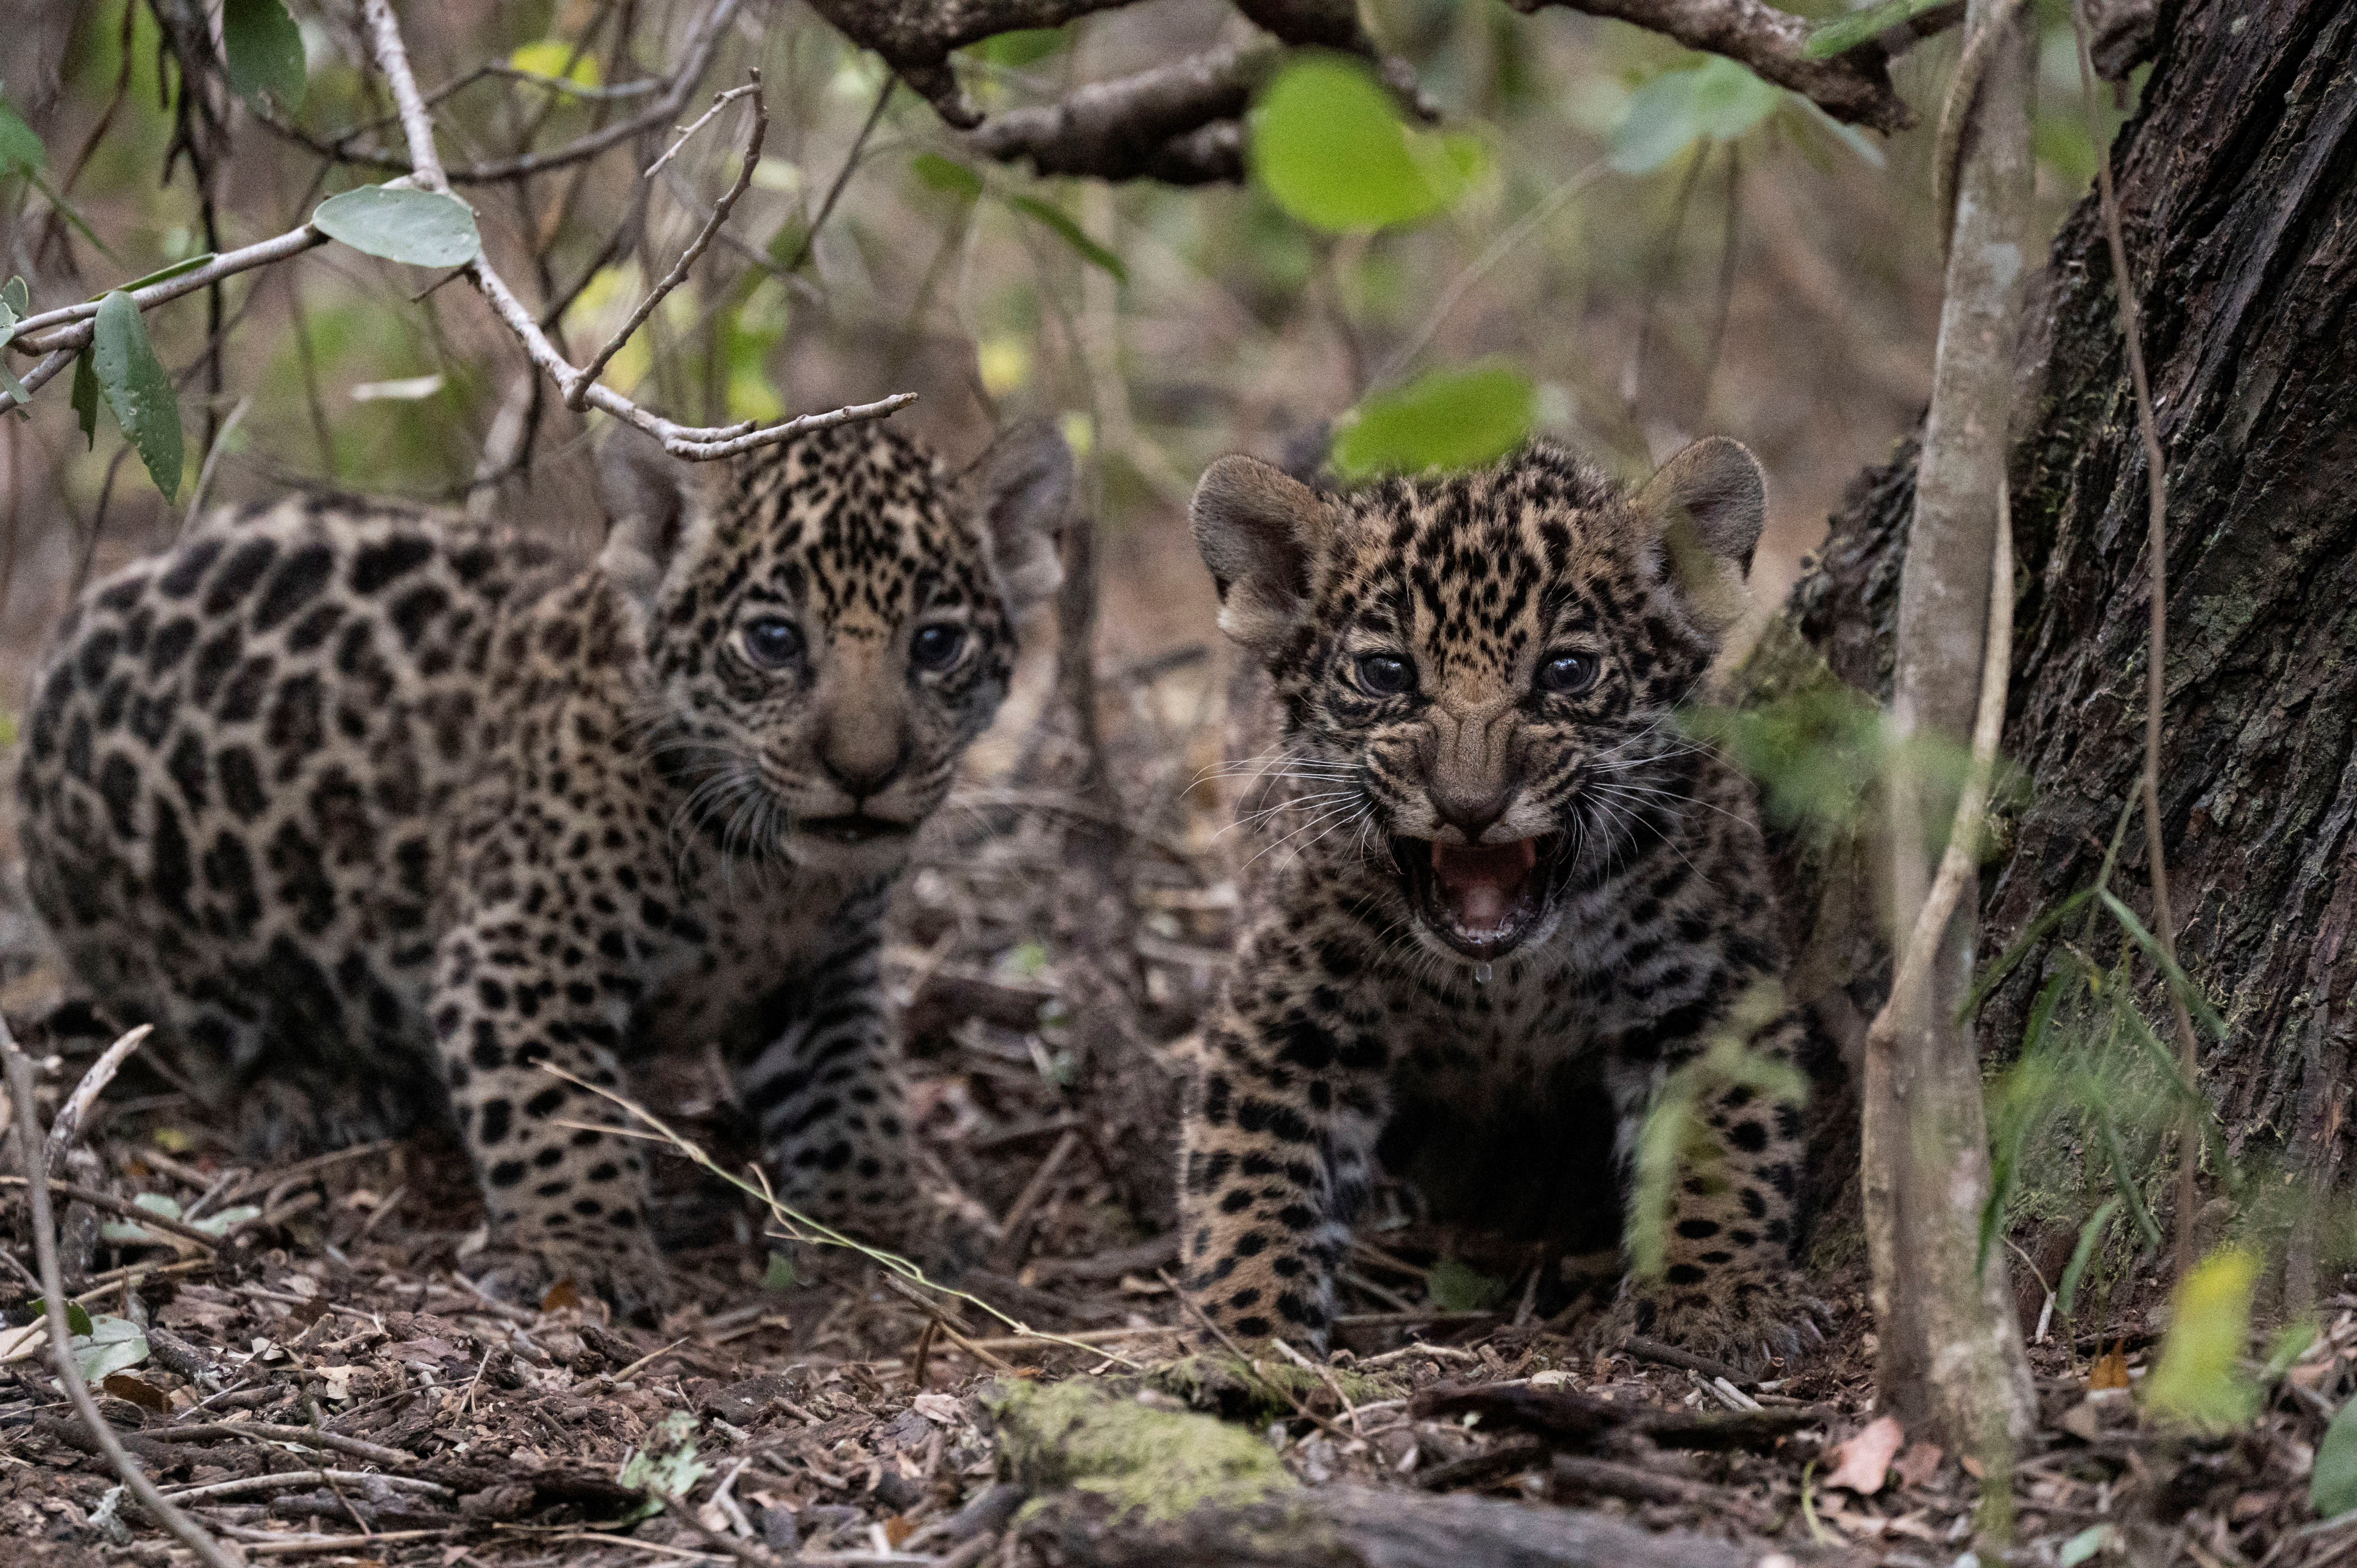 Two jaguar cubs, a critically endangered species, are released in an Argentine national park